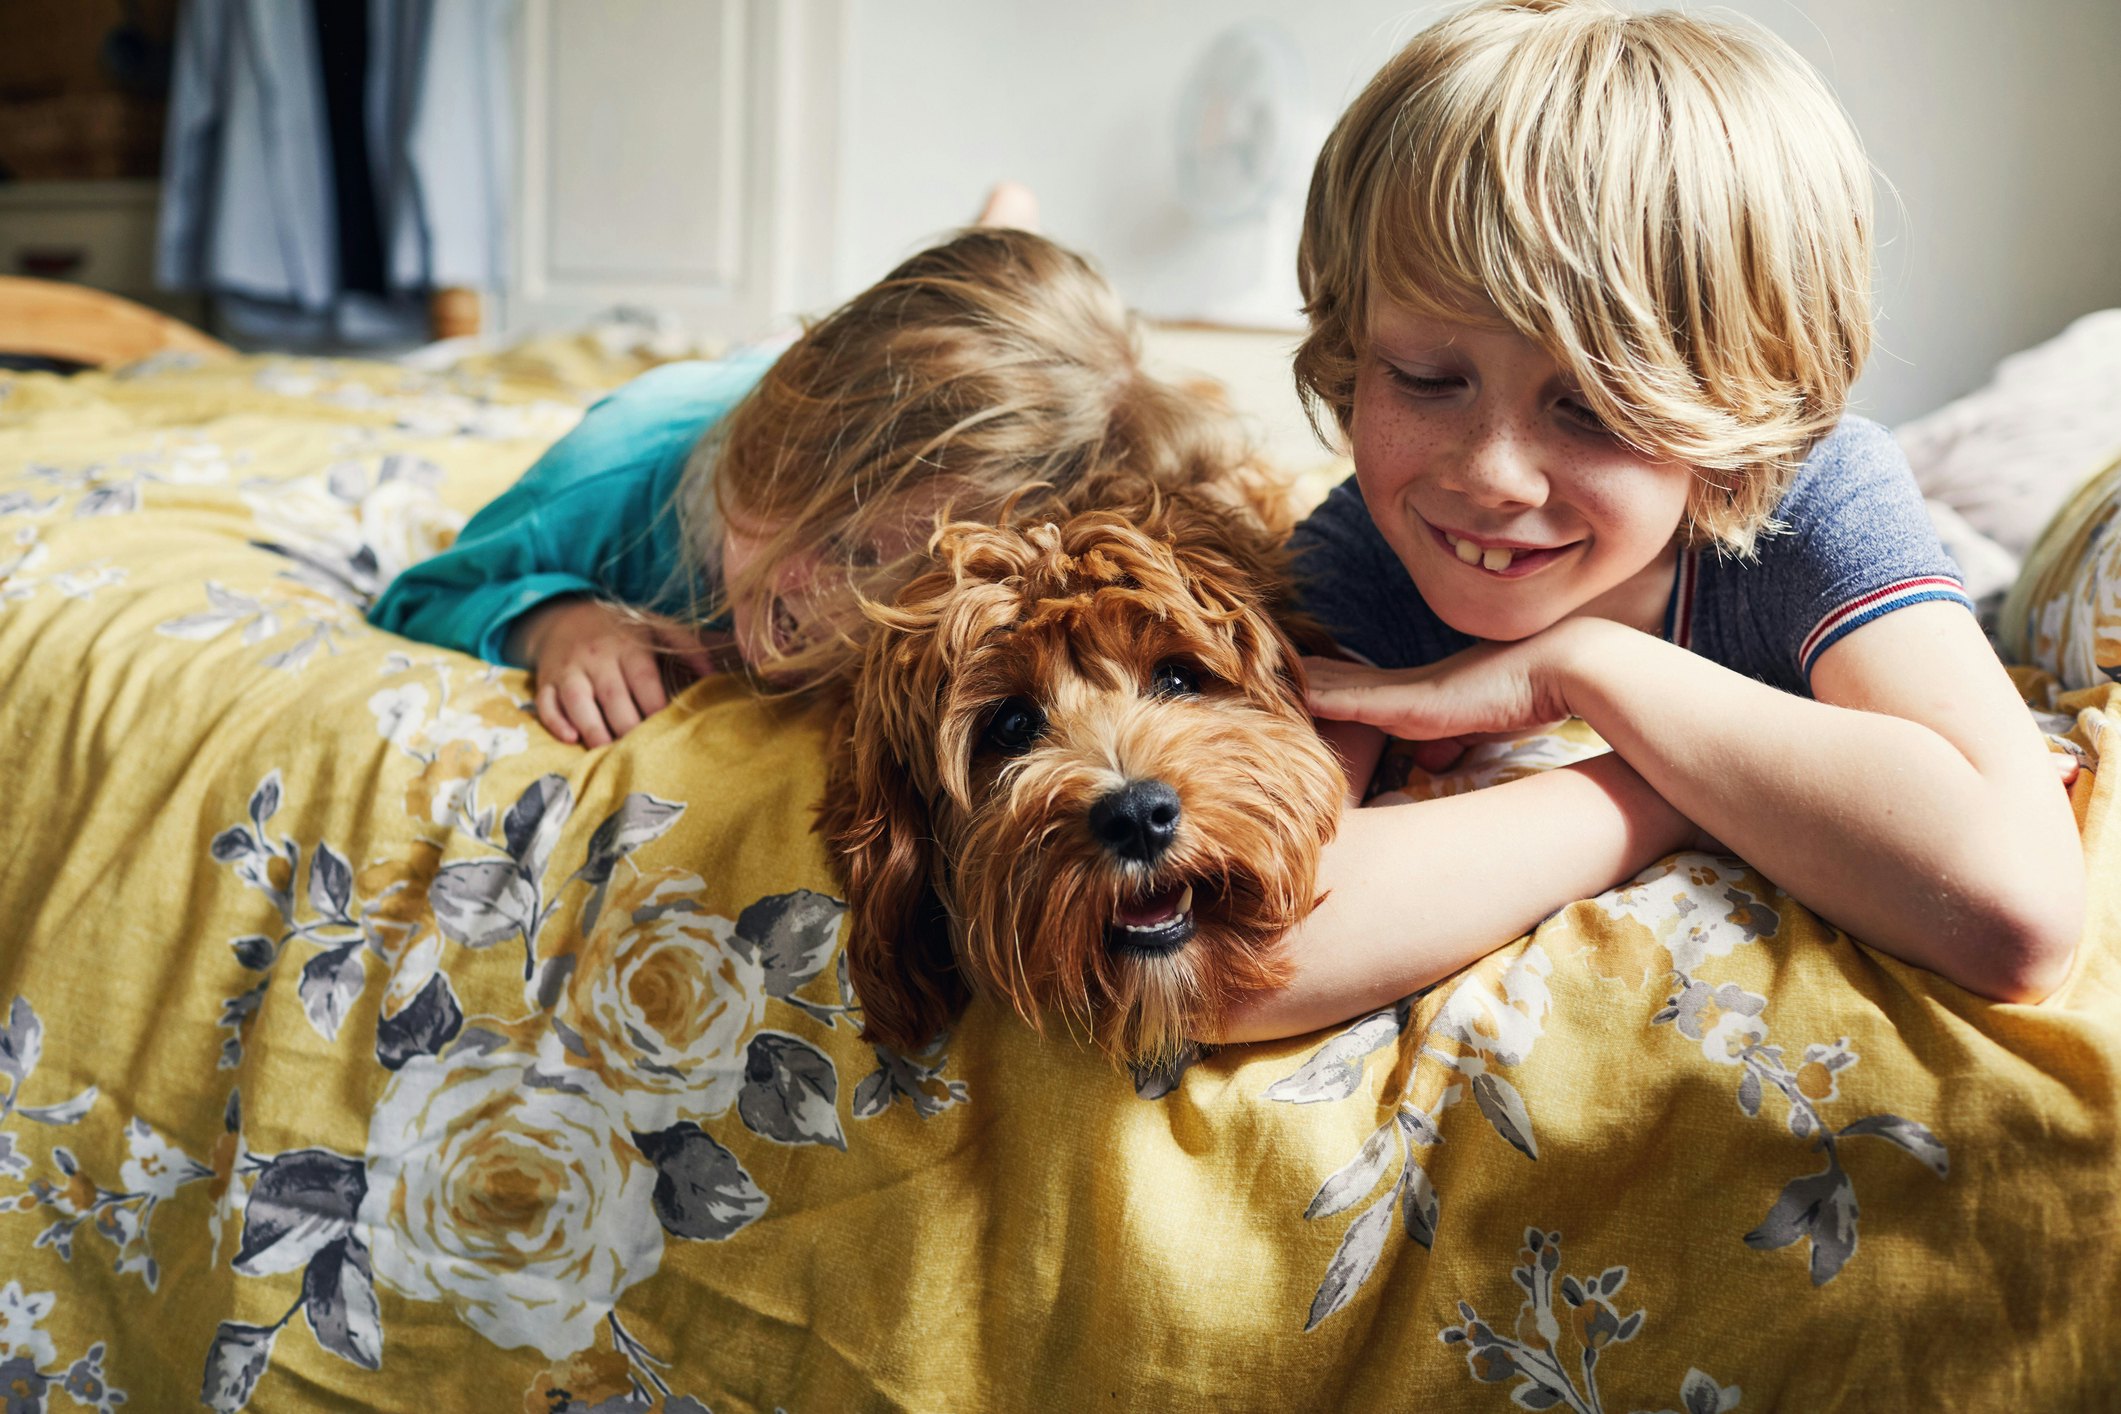 thinking-of-fostering-a-pet?-heres-what-your-family-needs-to-consider-first